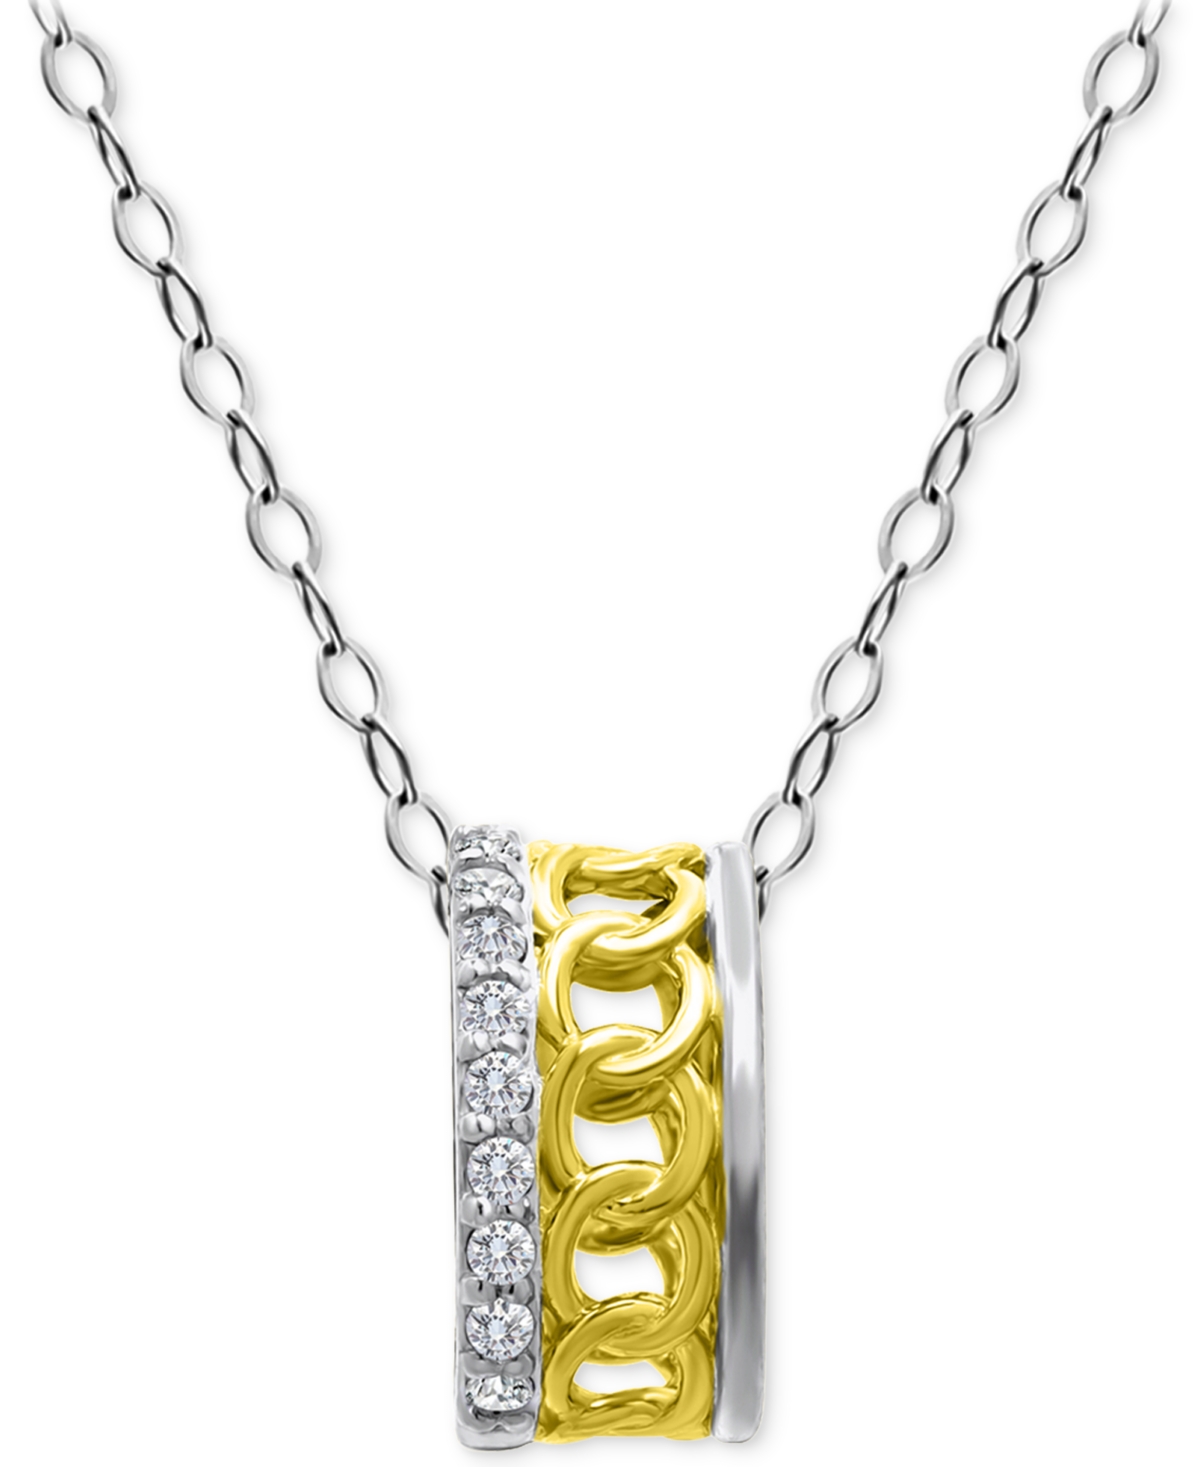 Giani Bernini Cubic Zirconia Open Link Rondelle Slide Pendant Necklace, 16" + 2" Extender, Created For Macy's In Twotone